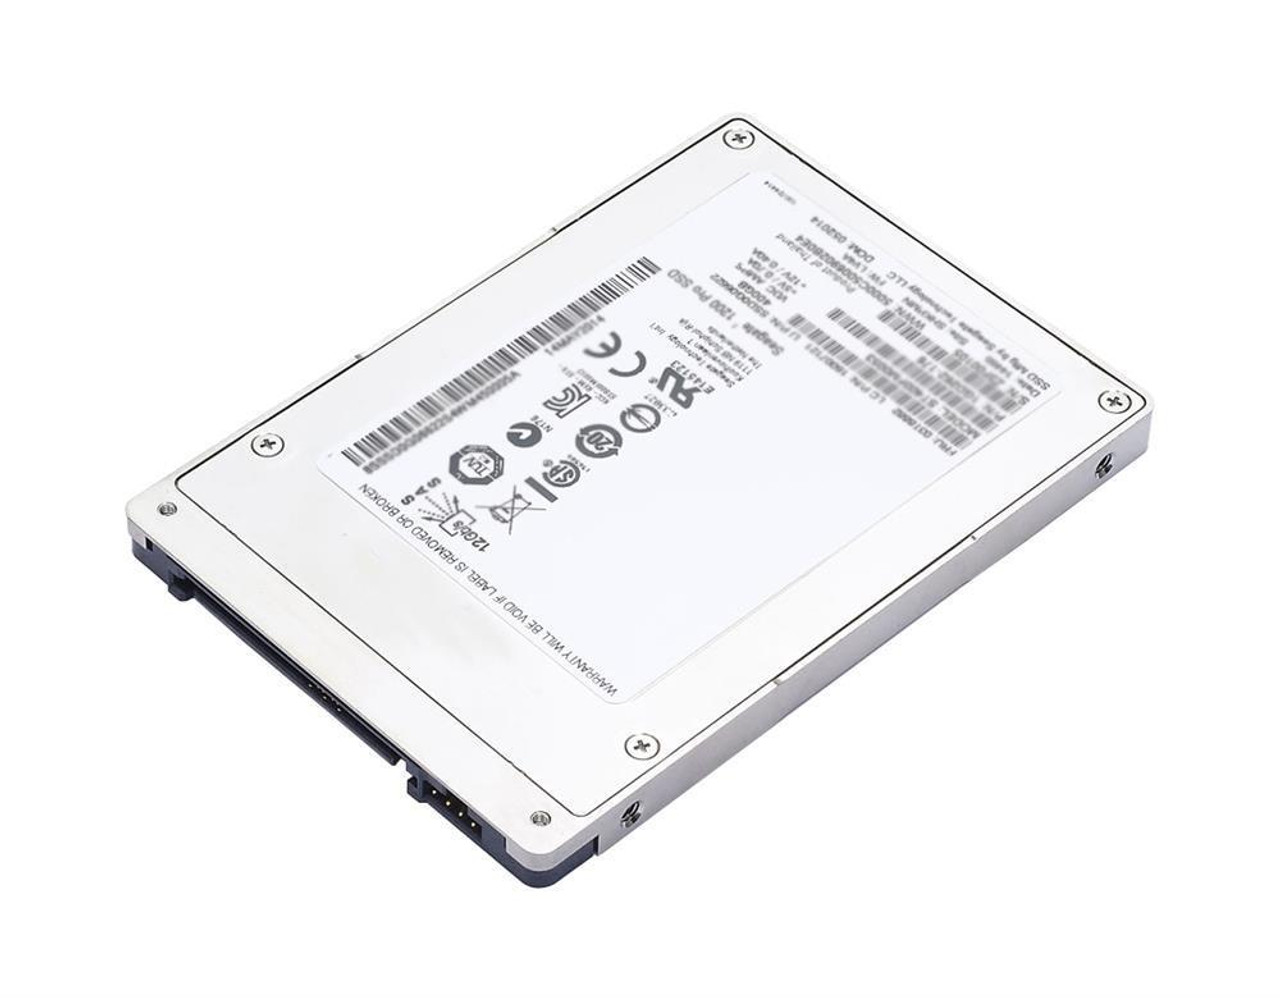 04X2603 Lenovo 512GB MLC SATA 6Gbps 2.5-inch Internal Solid State Drive (SSD) for Thinkstation E32 Tower